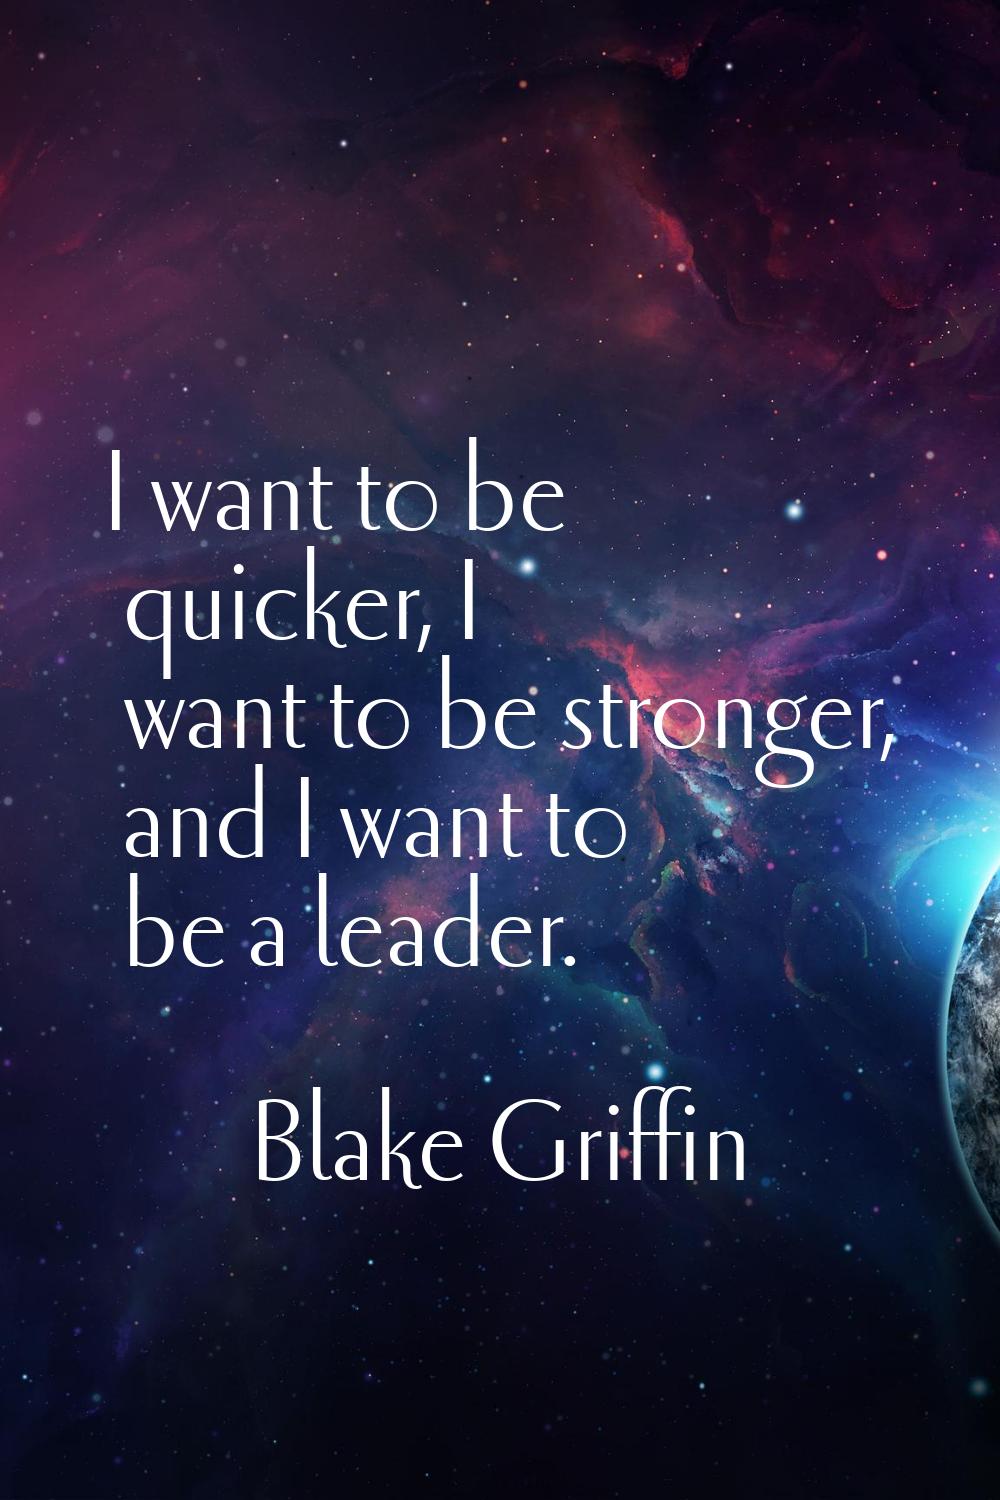 I want to be quicker, I want to be stronger, and I want to be a leader.